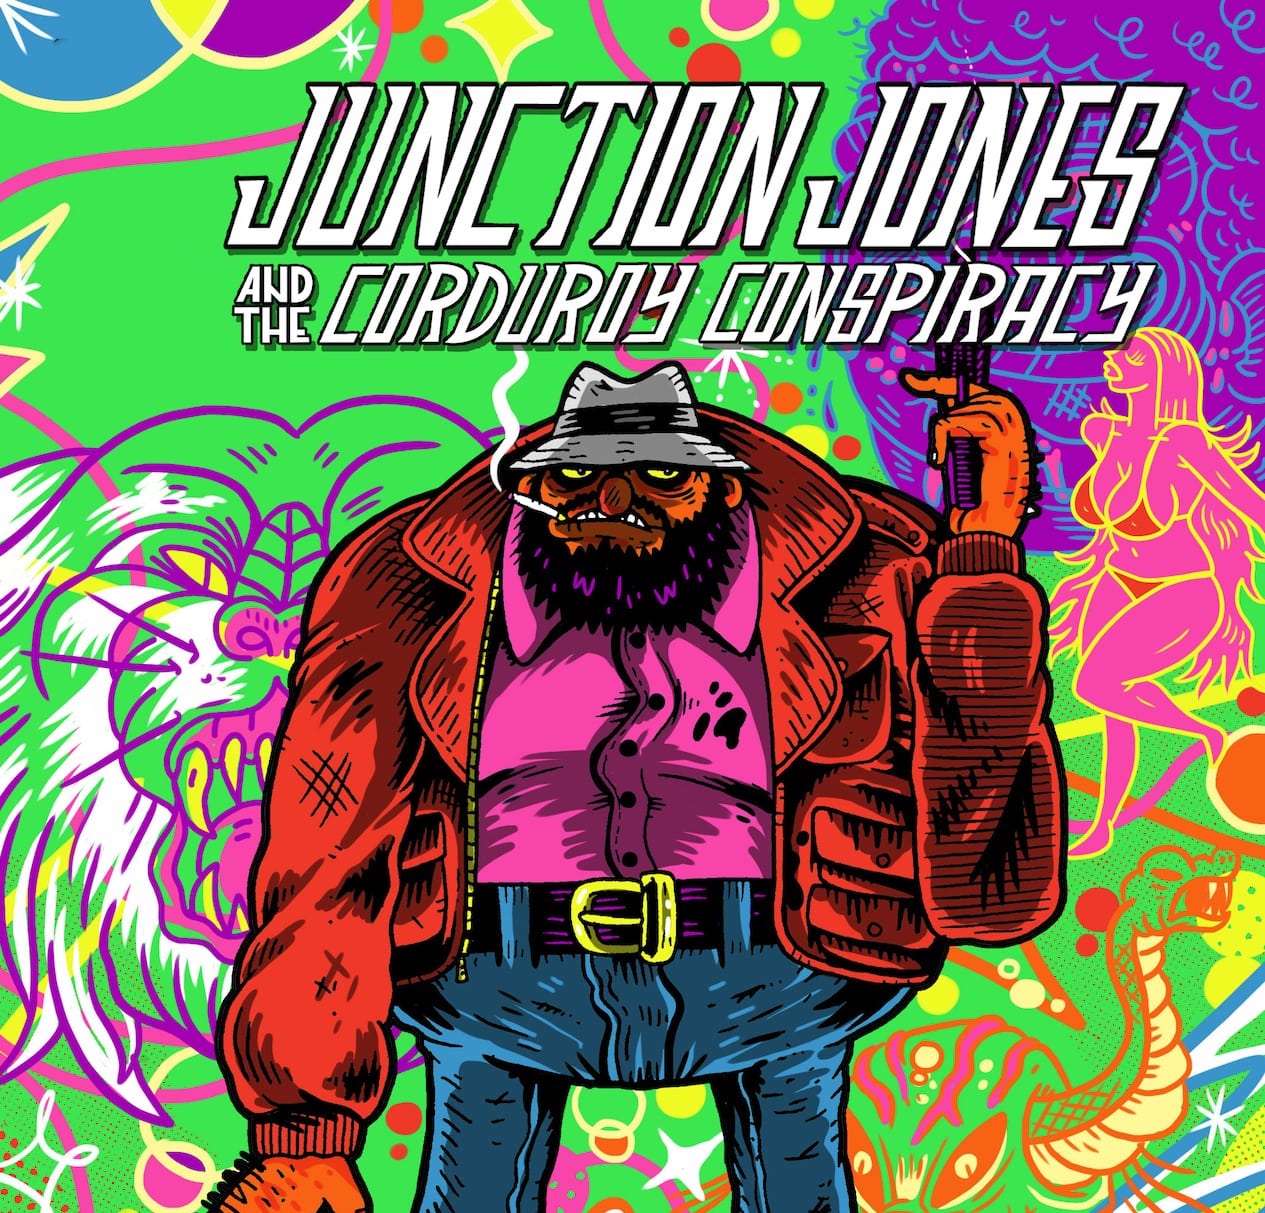 Pulp mystery series 'Junction Jones and The Corduroy Conspiracy' coming February 2023